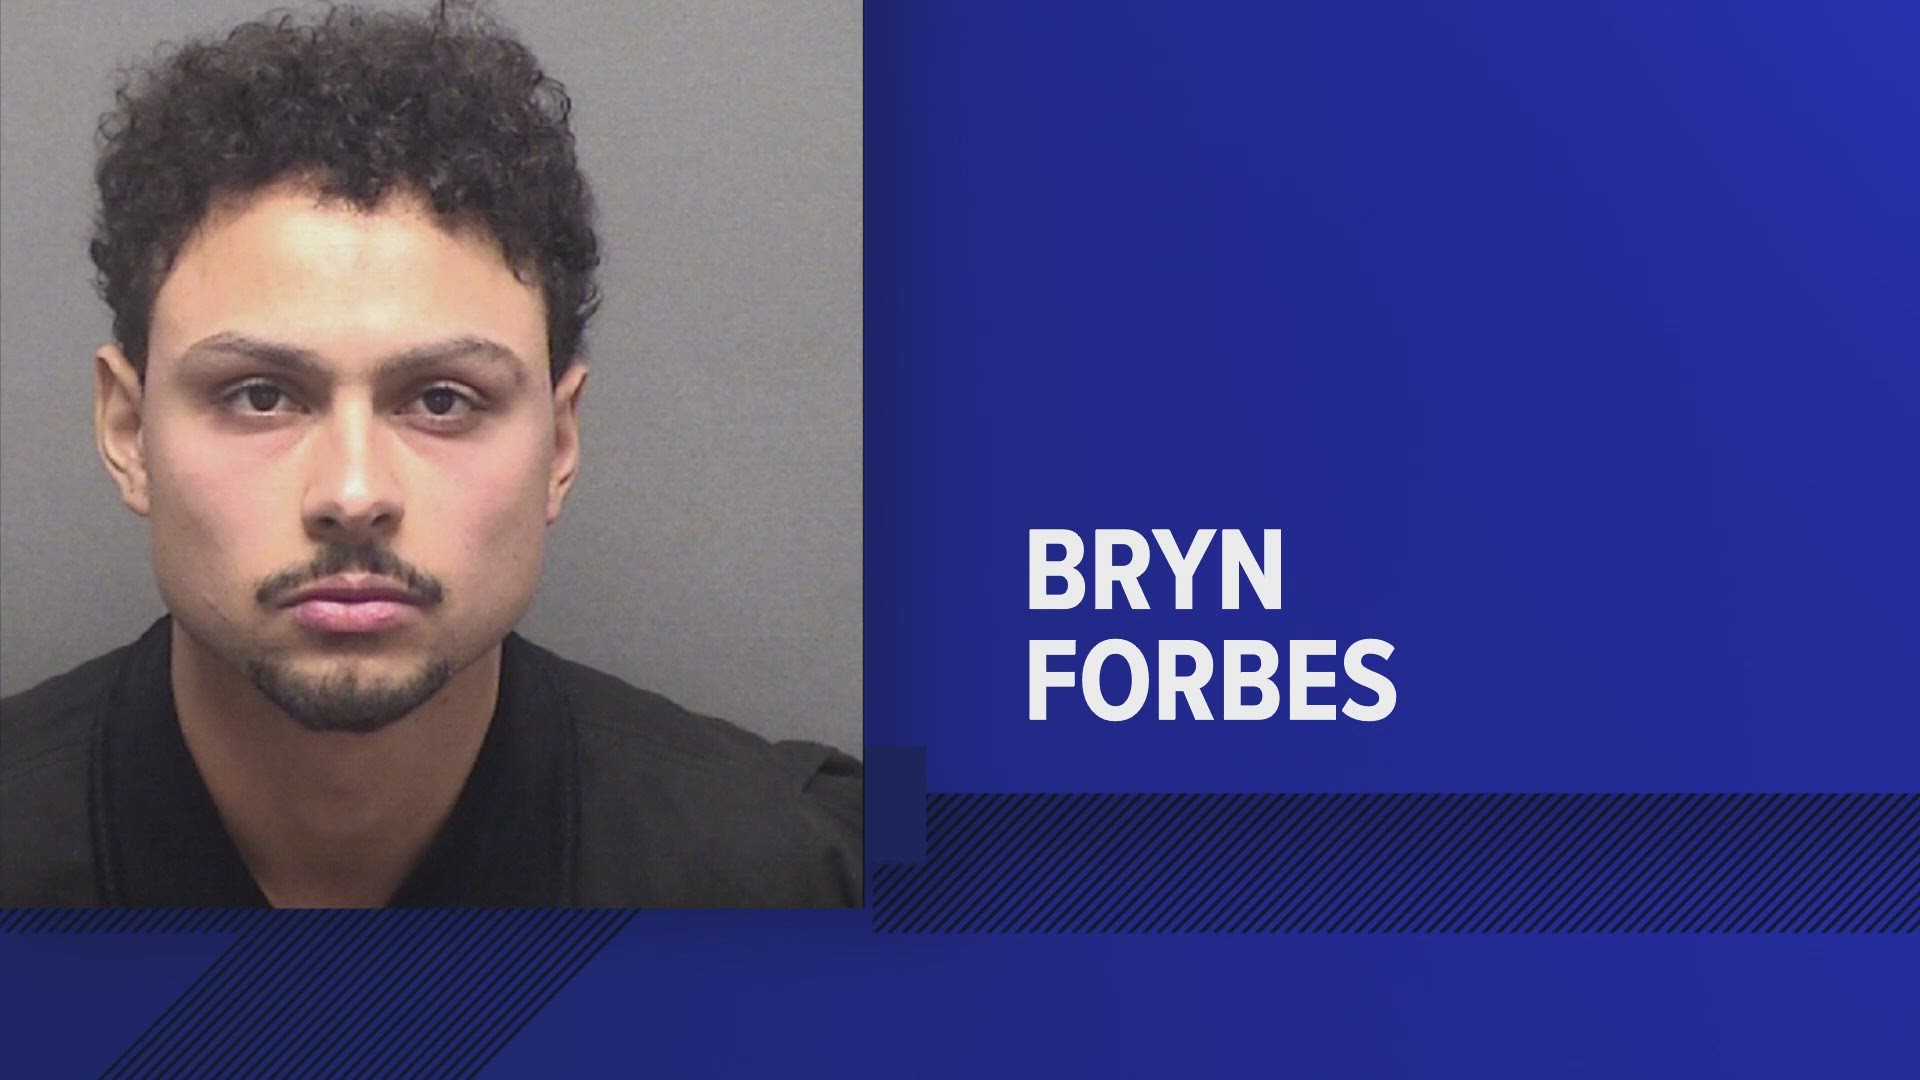 According to an arrest affidavit, Forbes came over to the victim's San Antonio apartment and punched her in the head.